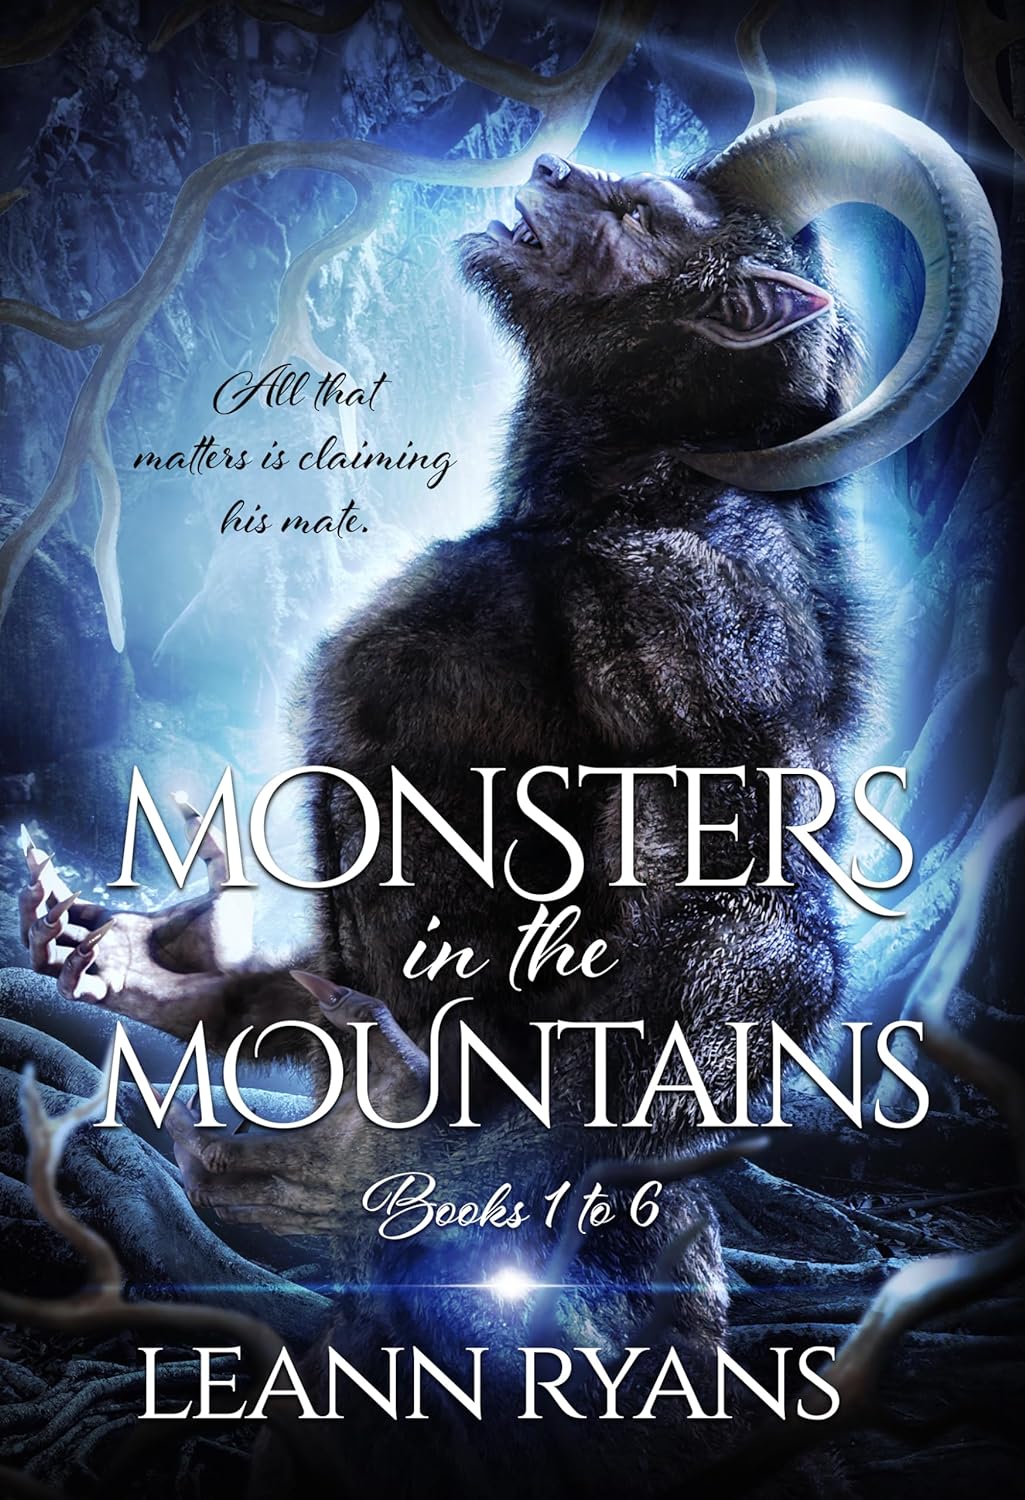 Monsters in the Mountains Books 1-6 by Leann Ryans